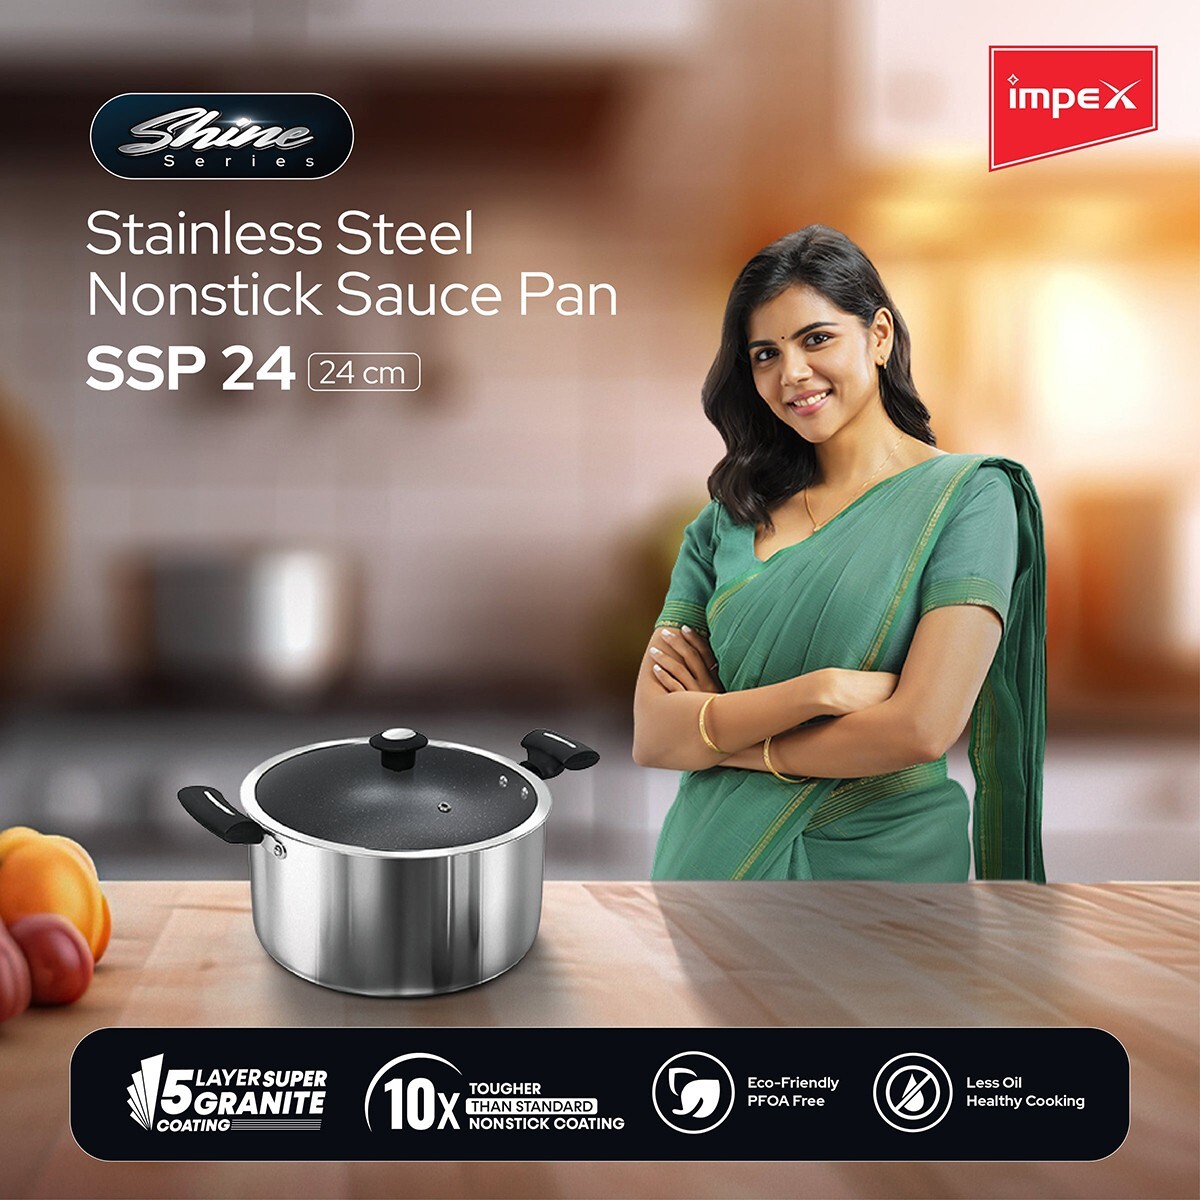 Impex Stainless Steel Non-Stick Sauce Pan 24cm SSP24